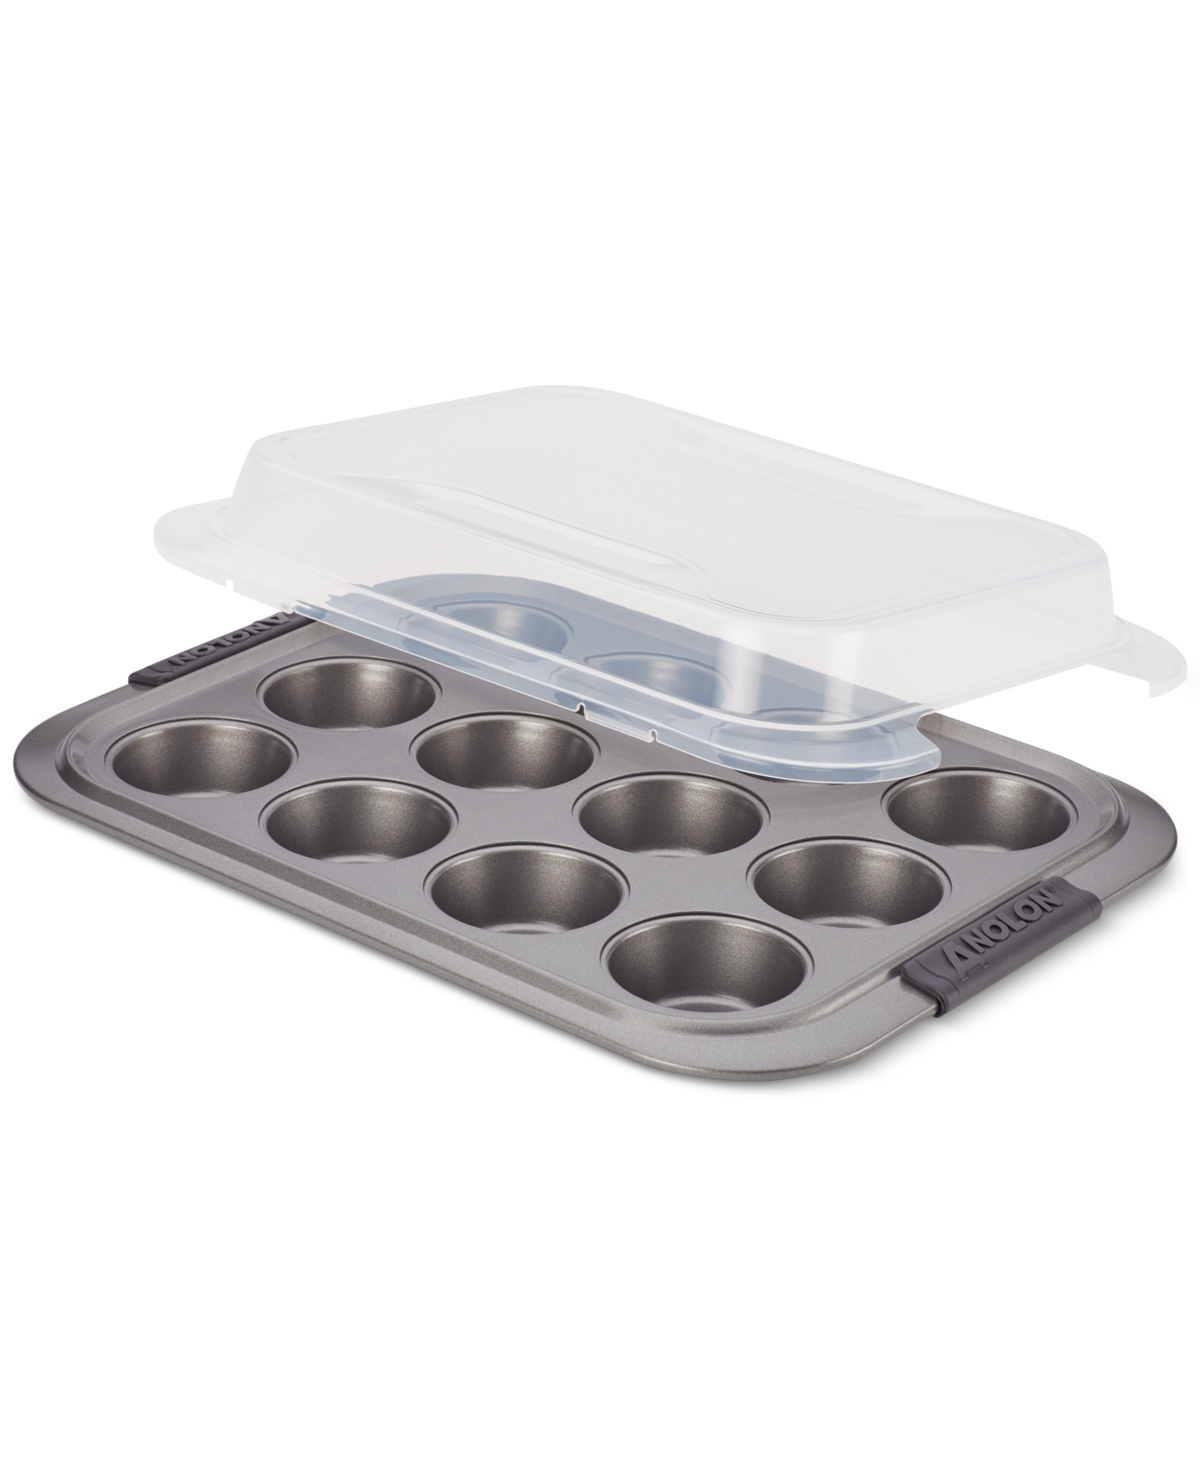 4609987 Anolon Advanced 12-Cup Covered Muffin Pan sku 4609987